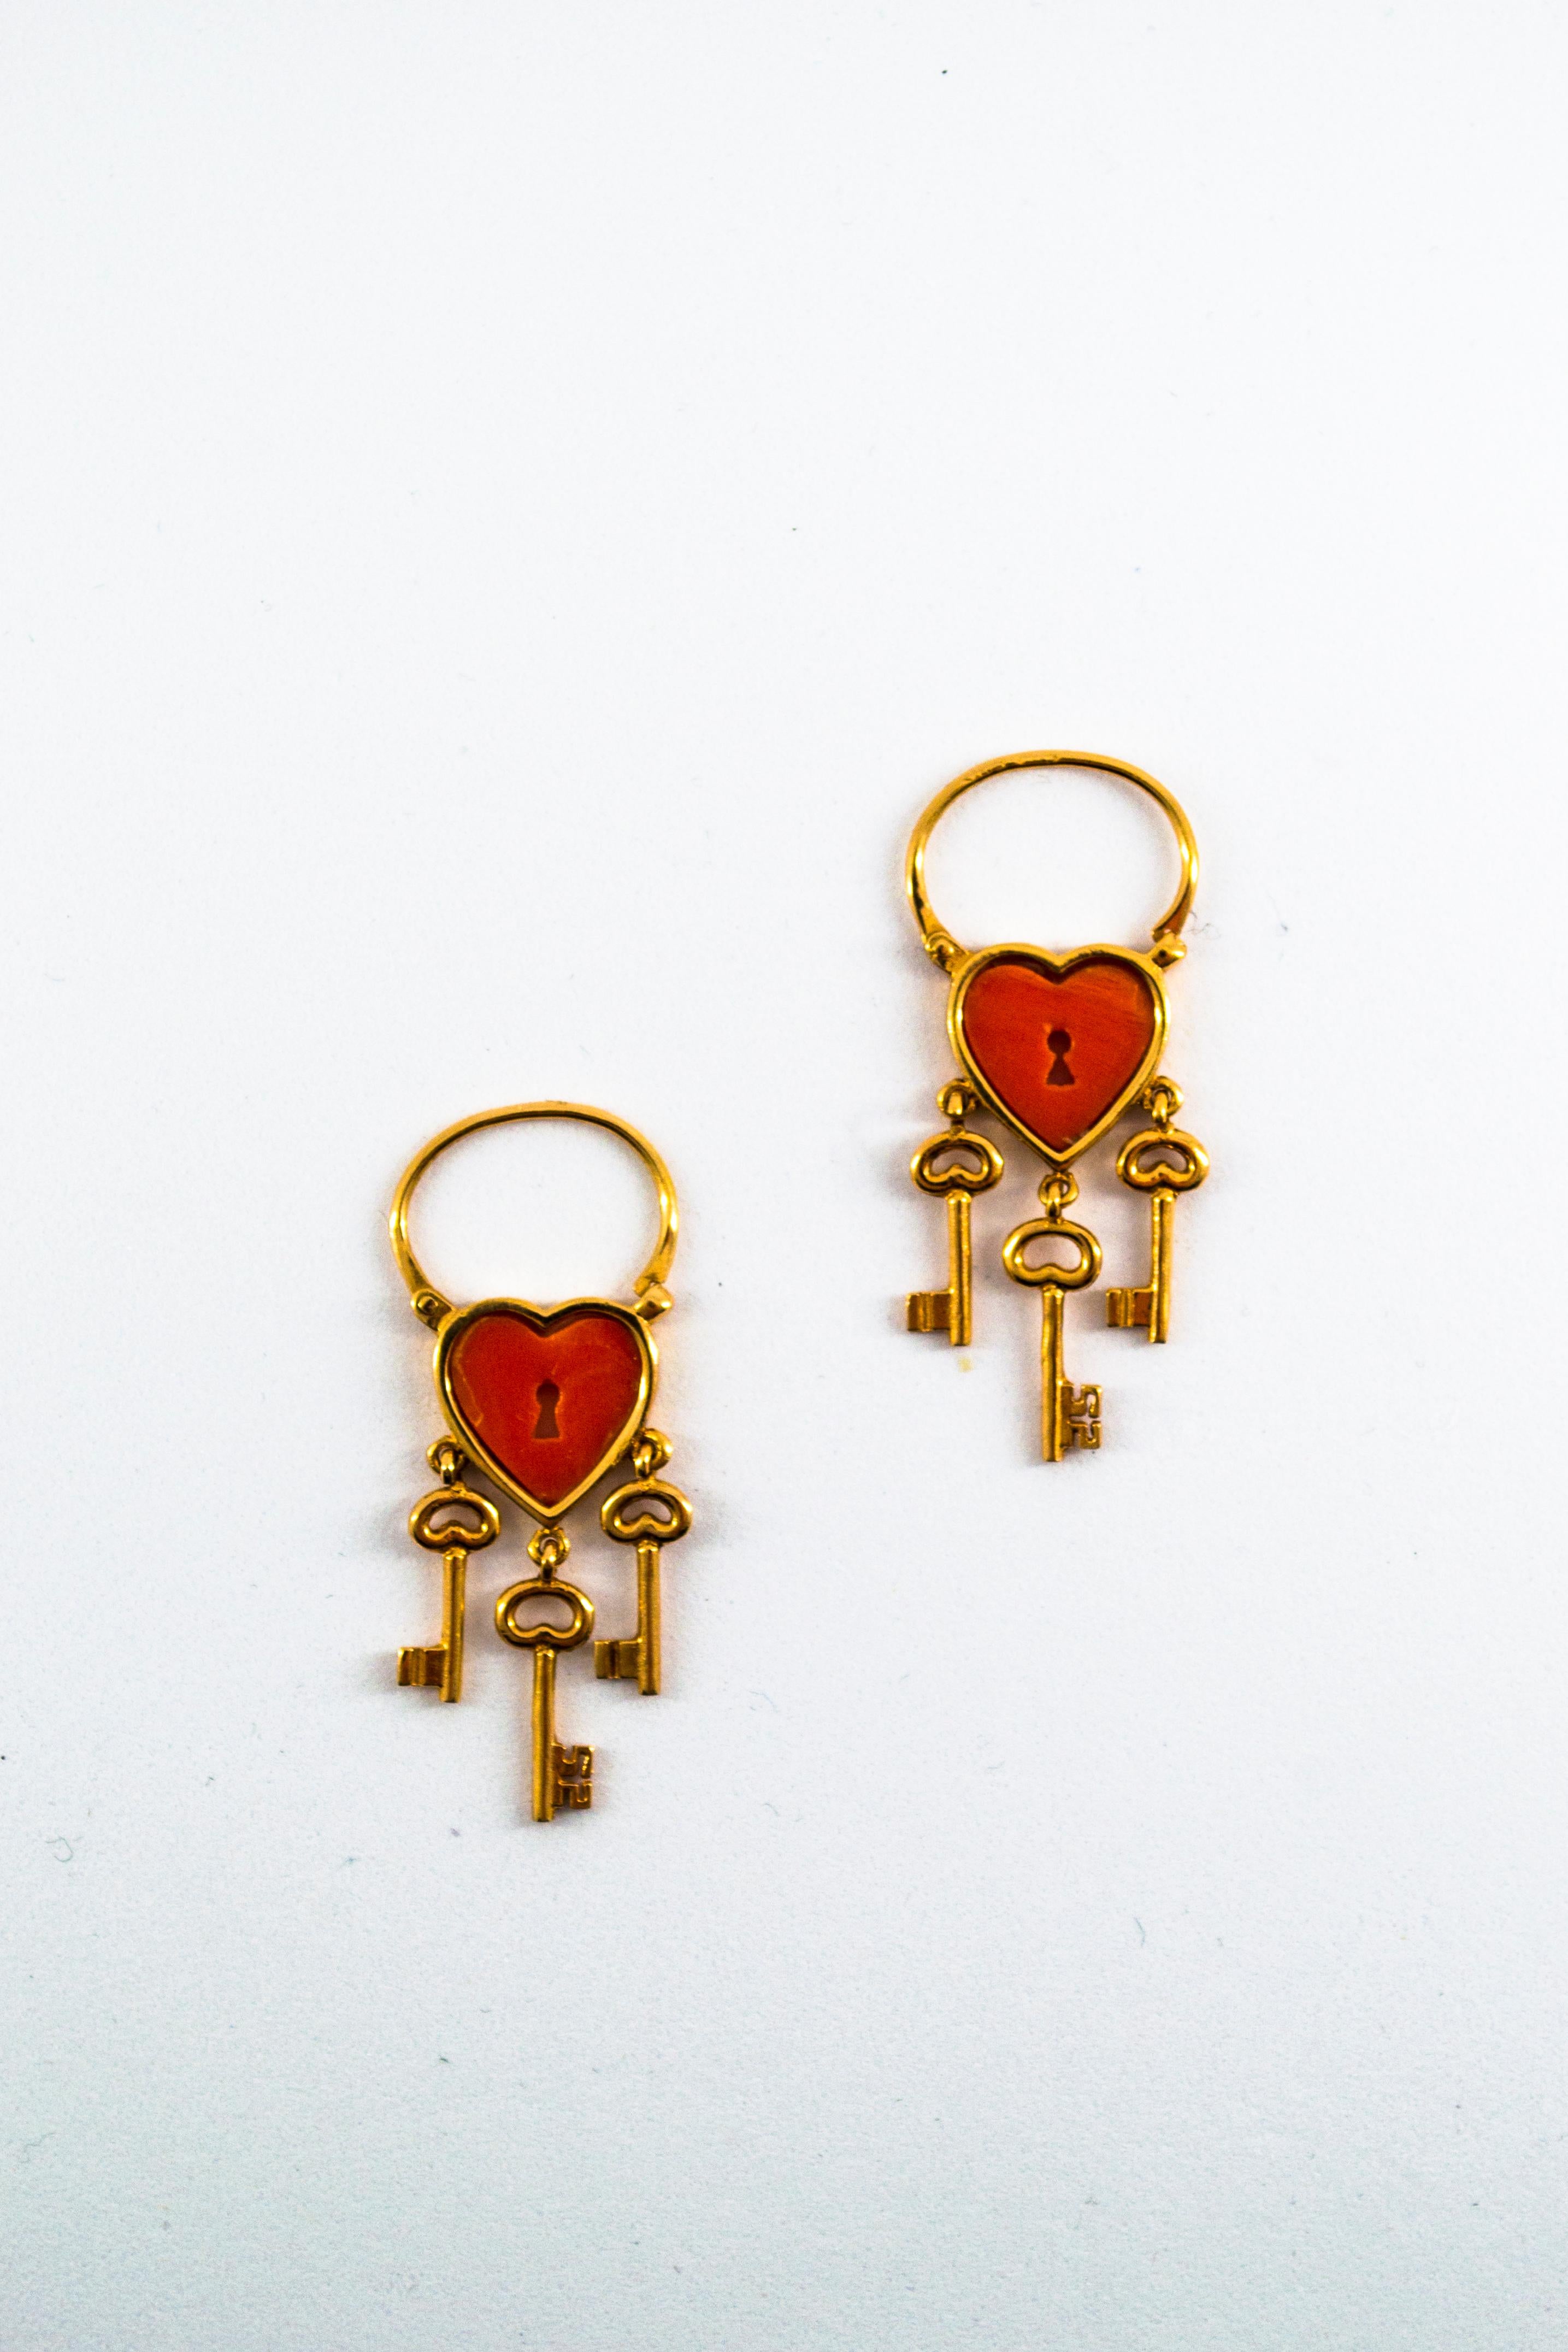 These Earrings are made of 14K Yellow Gold.
These Earrings have Mediterranean (Sardinia, Italy) Red Coral.
We're a workshop so every piece is handmade, customizable and resizable.